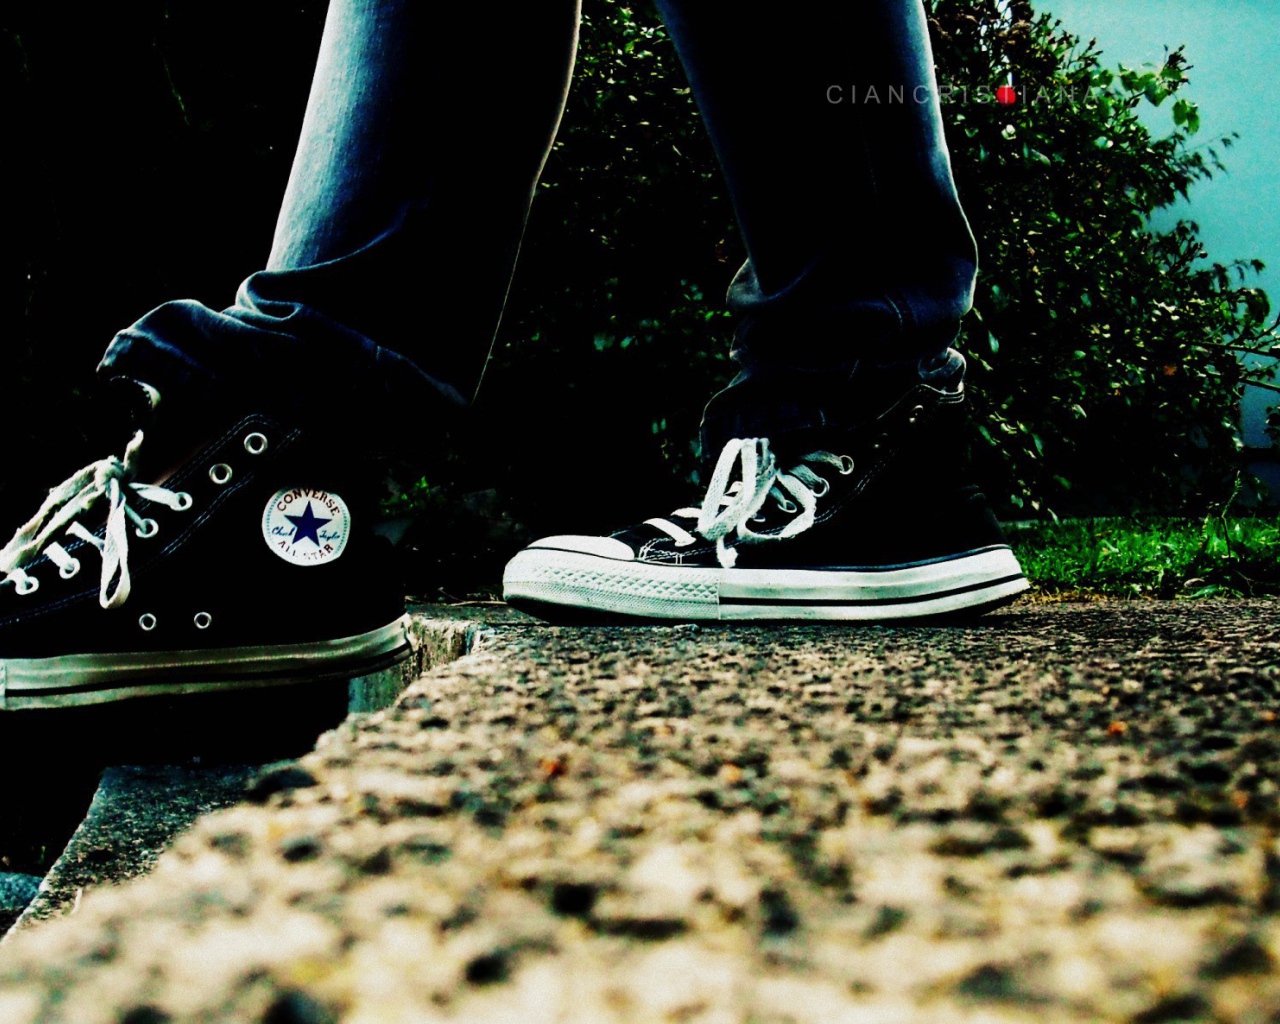 Converse jeans and shoes